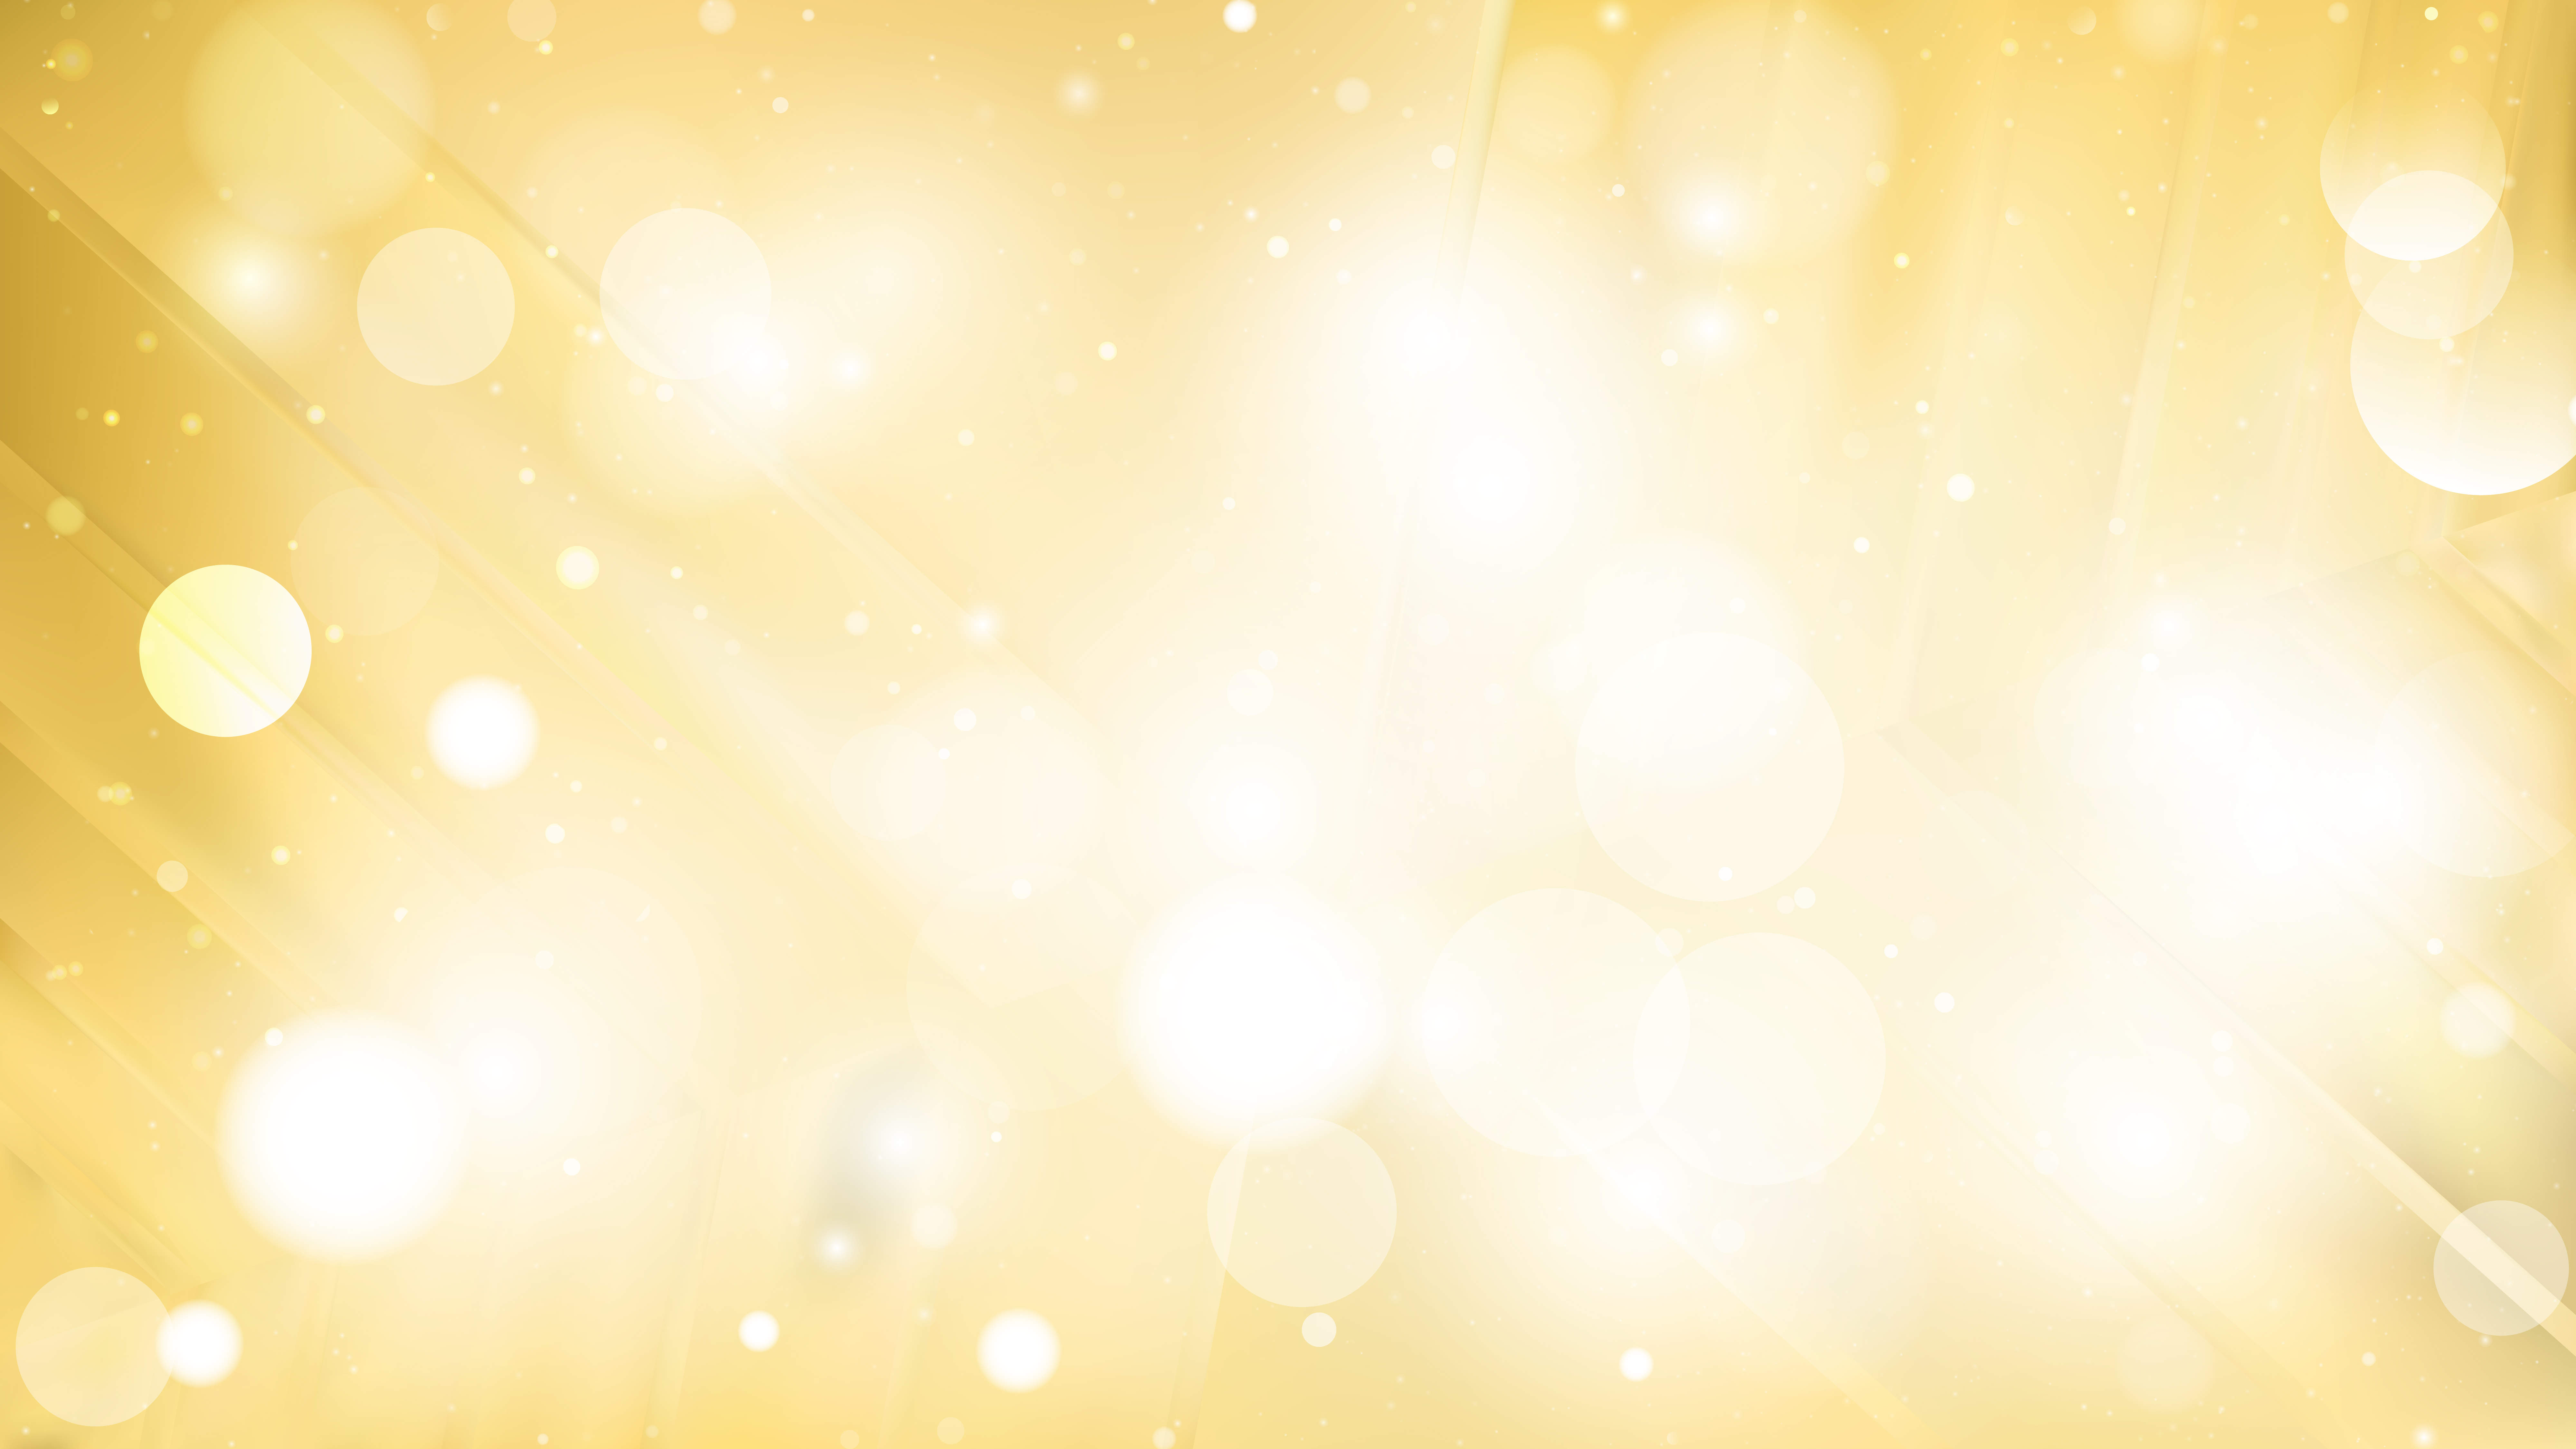 Free Abstract Orange and White Lights Background Image